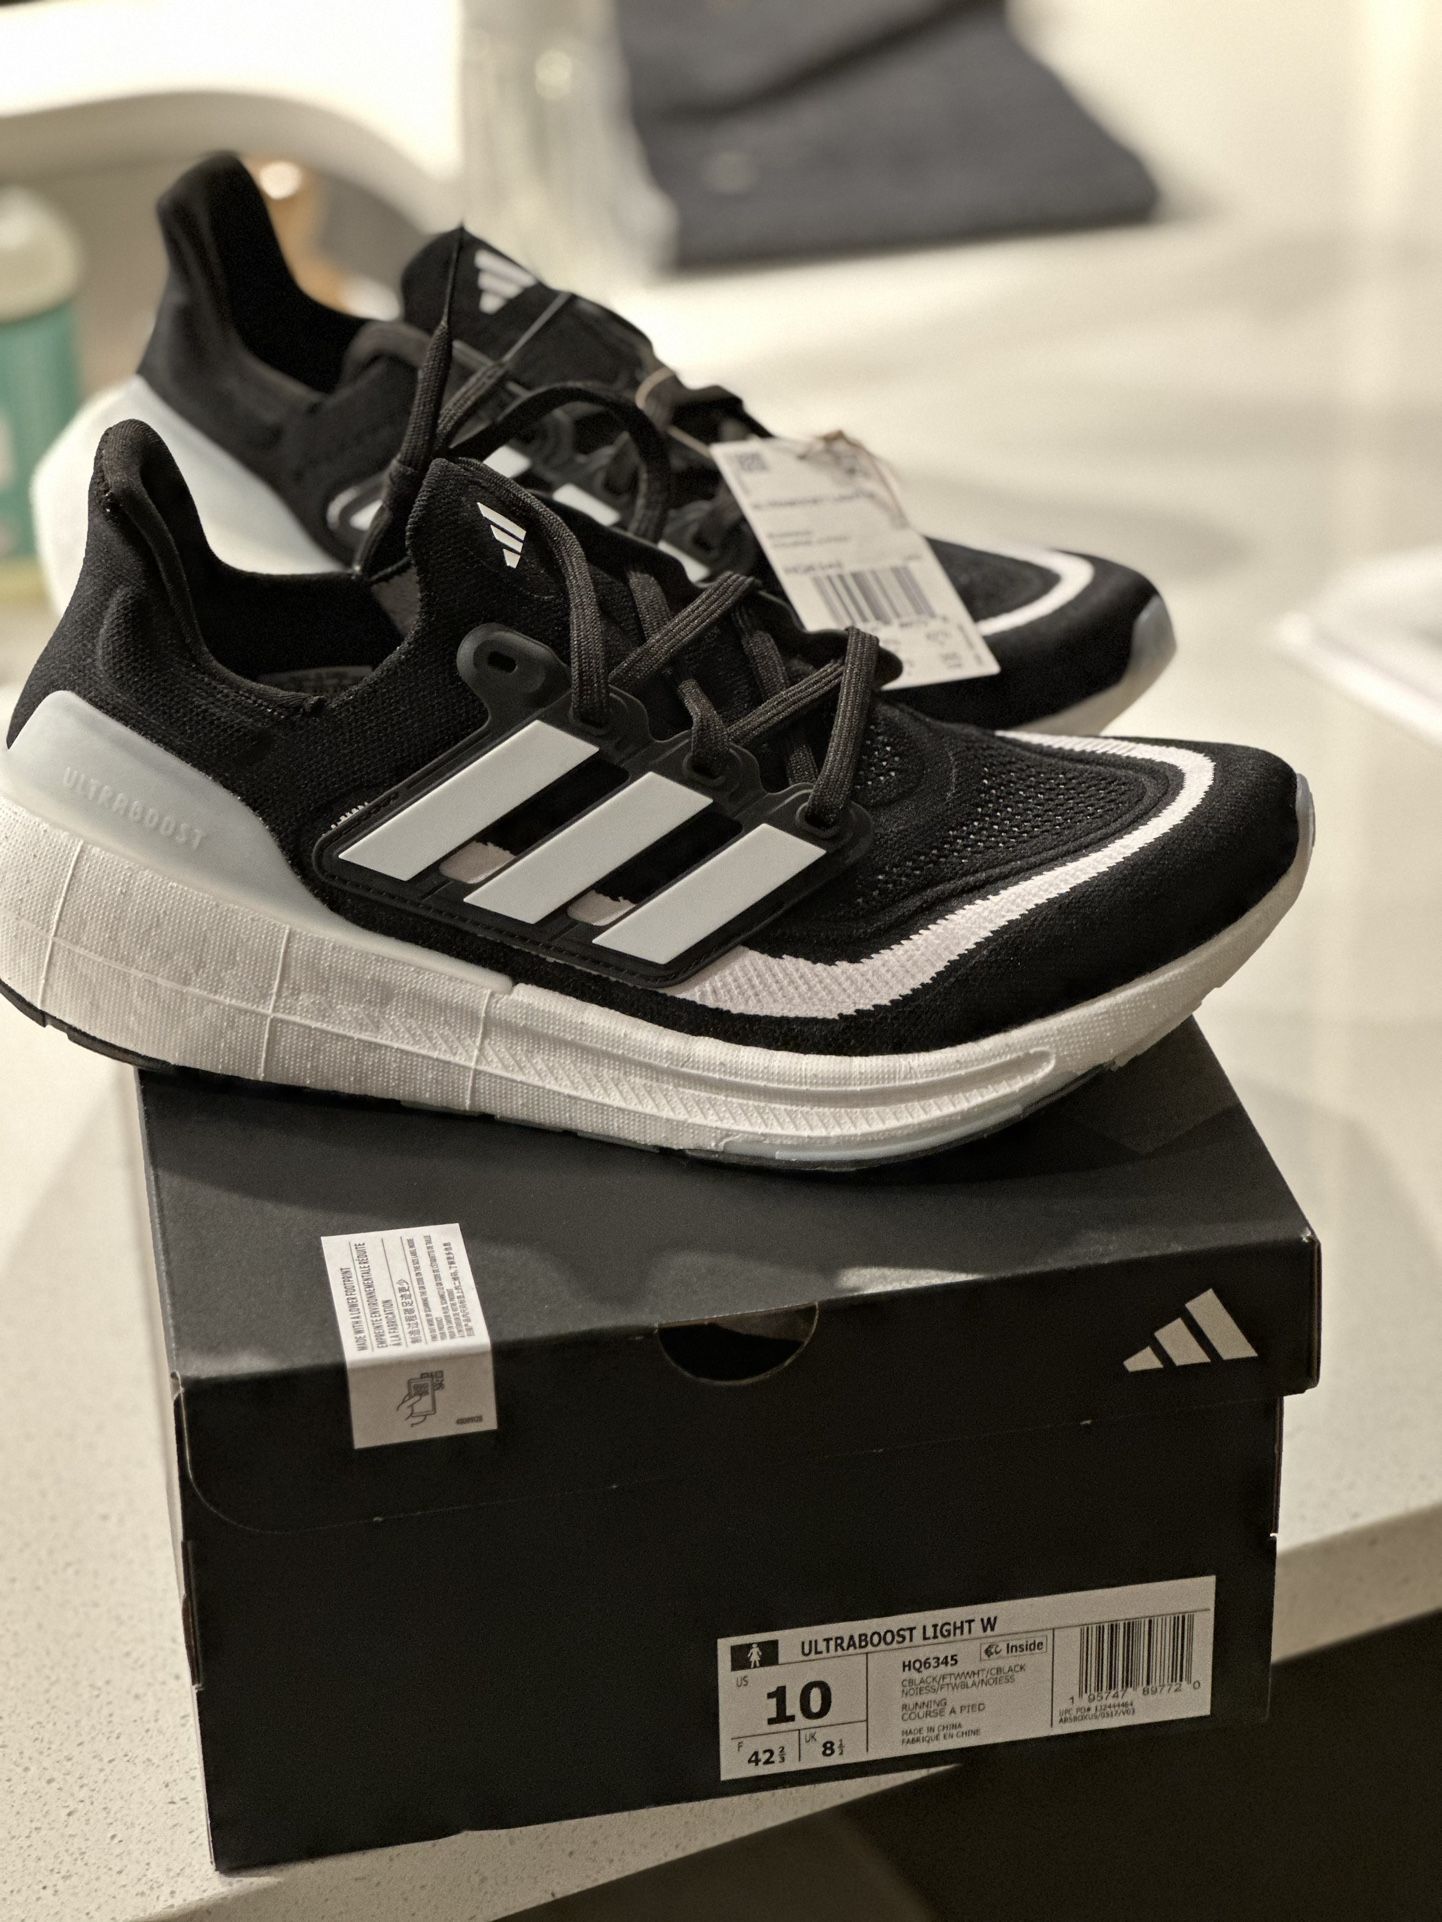 Women’s Adidas Ultra Boost Size 10 Brand New In Box